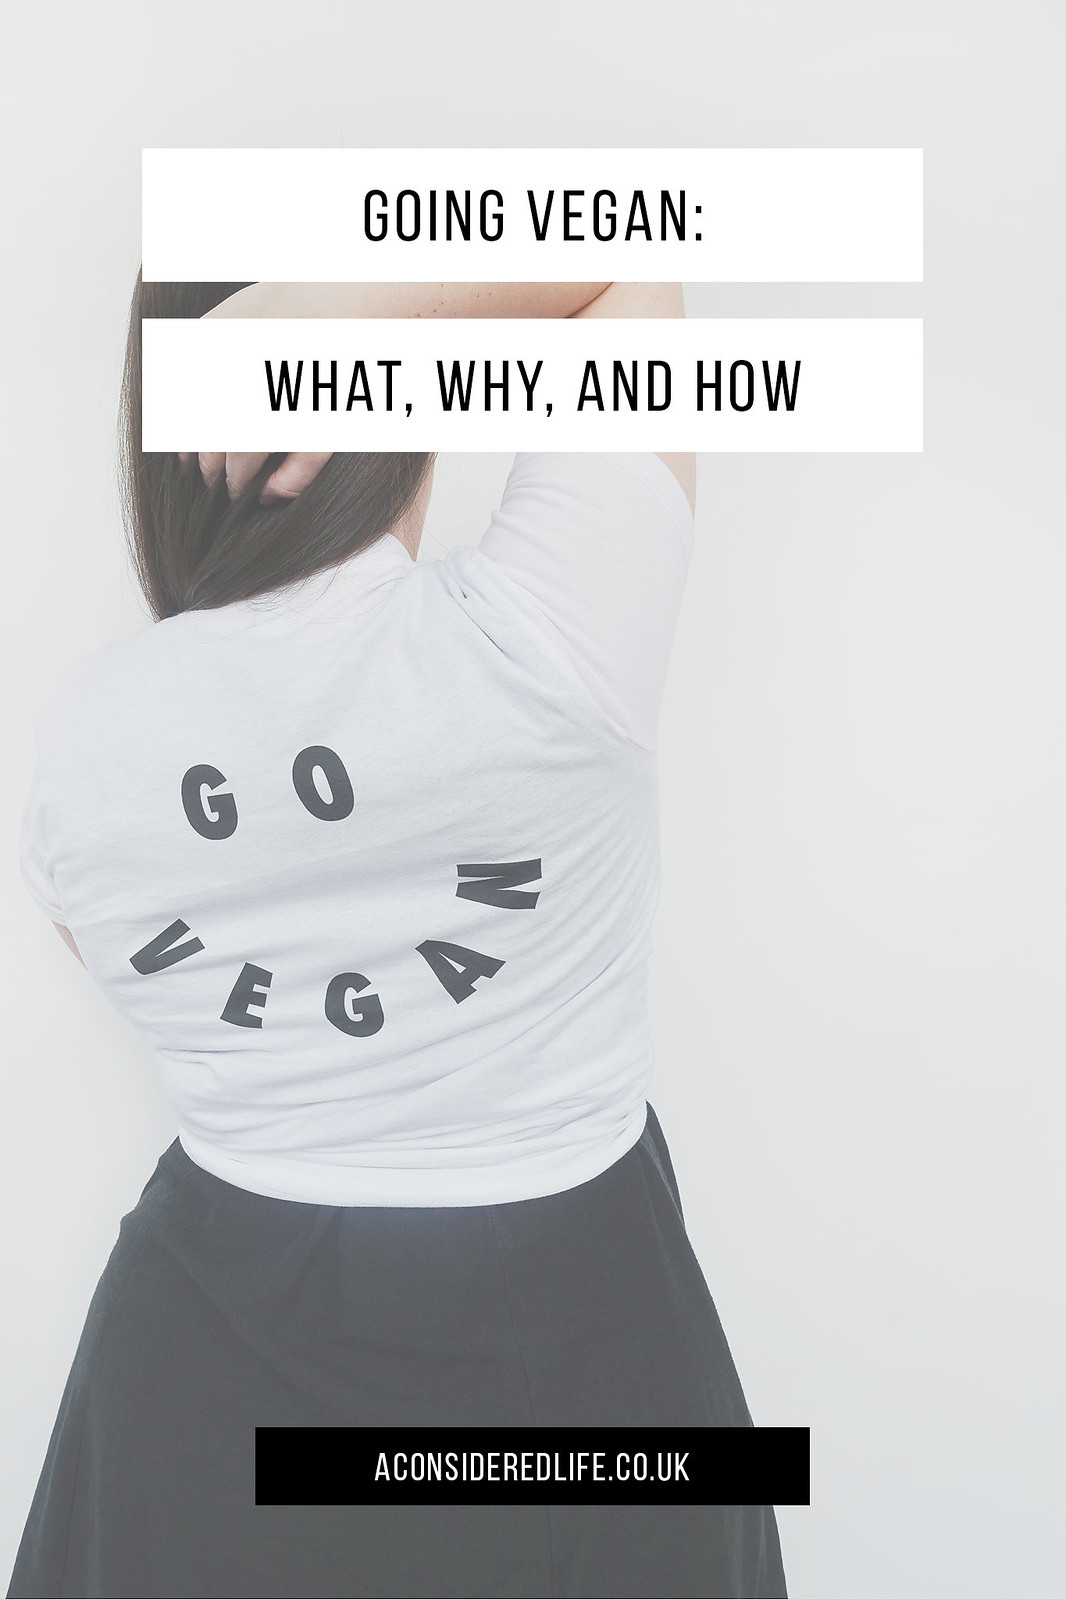 Go Vegan: What, Why, and How?